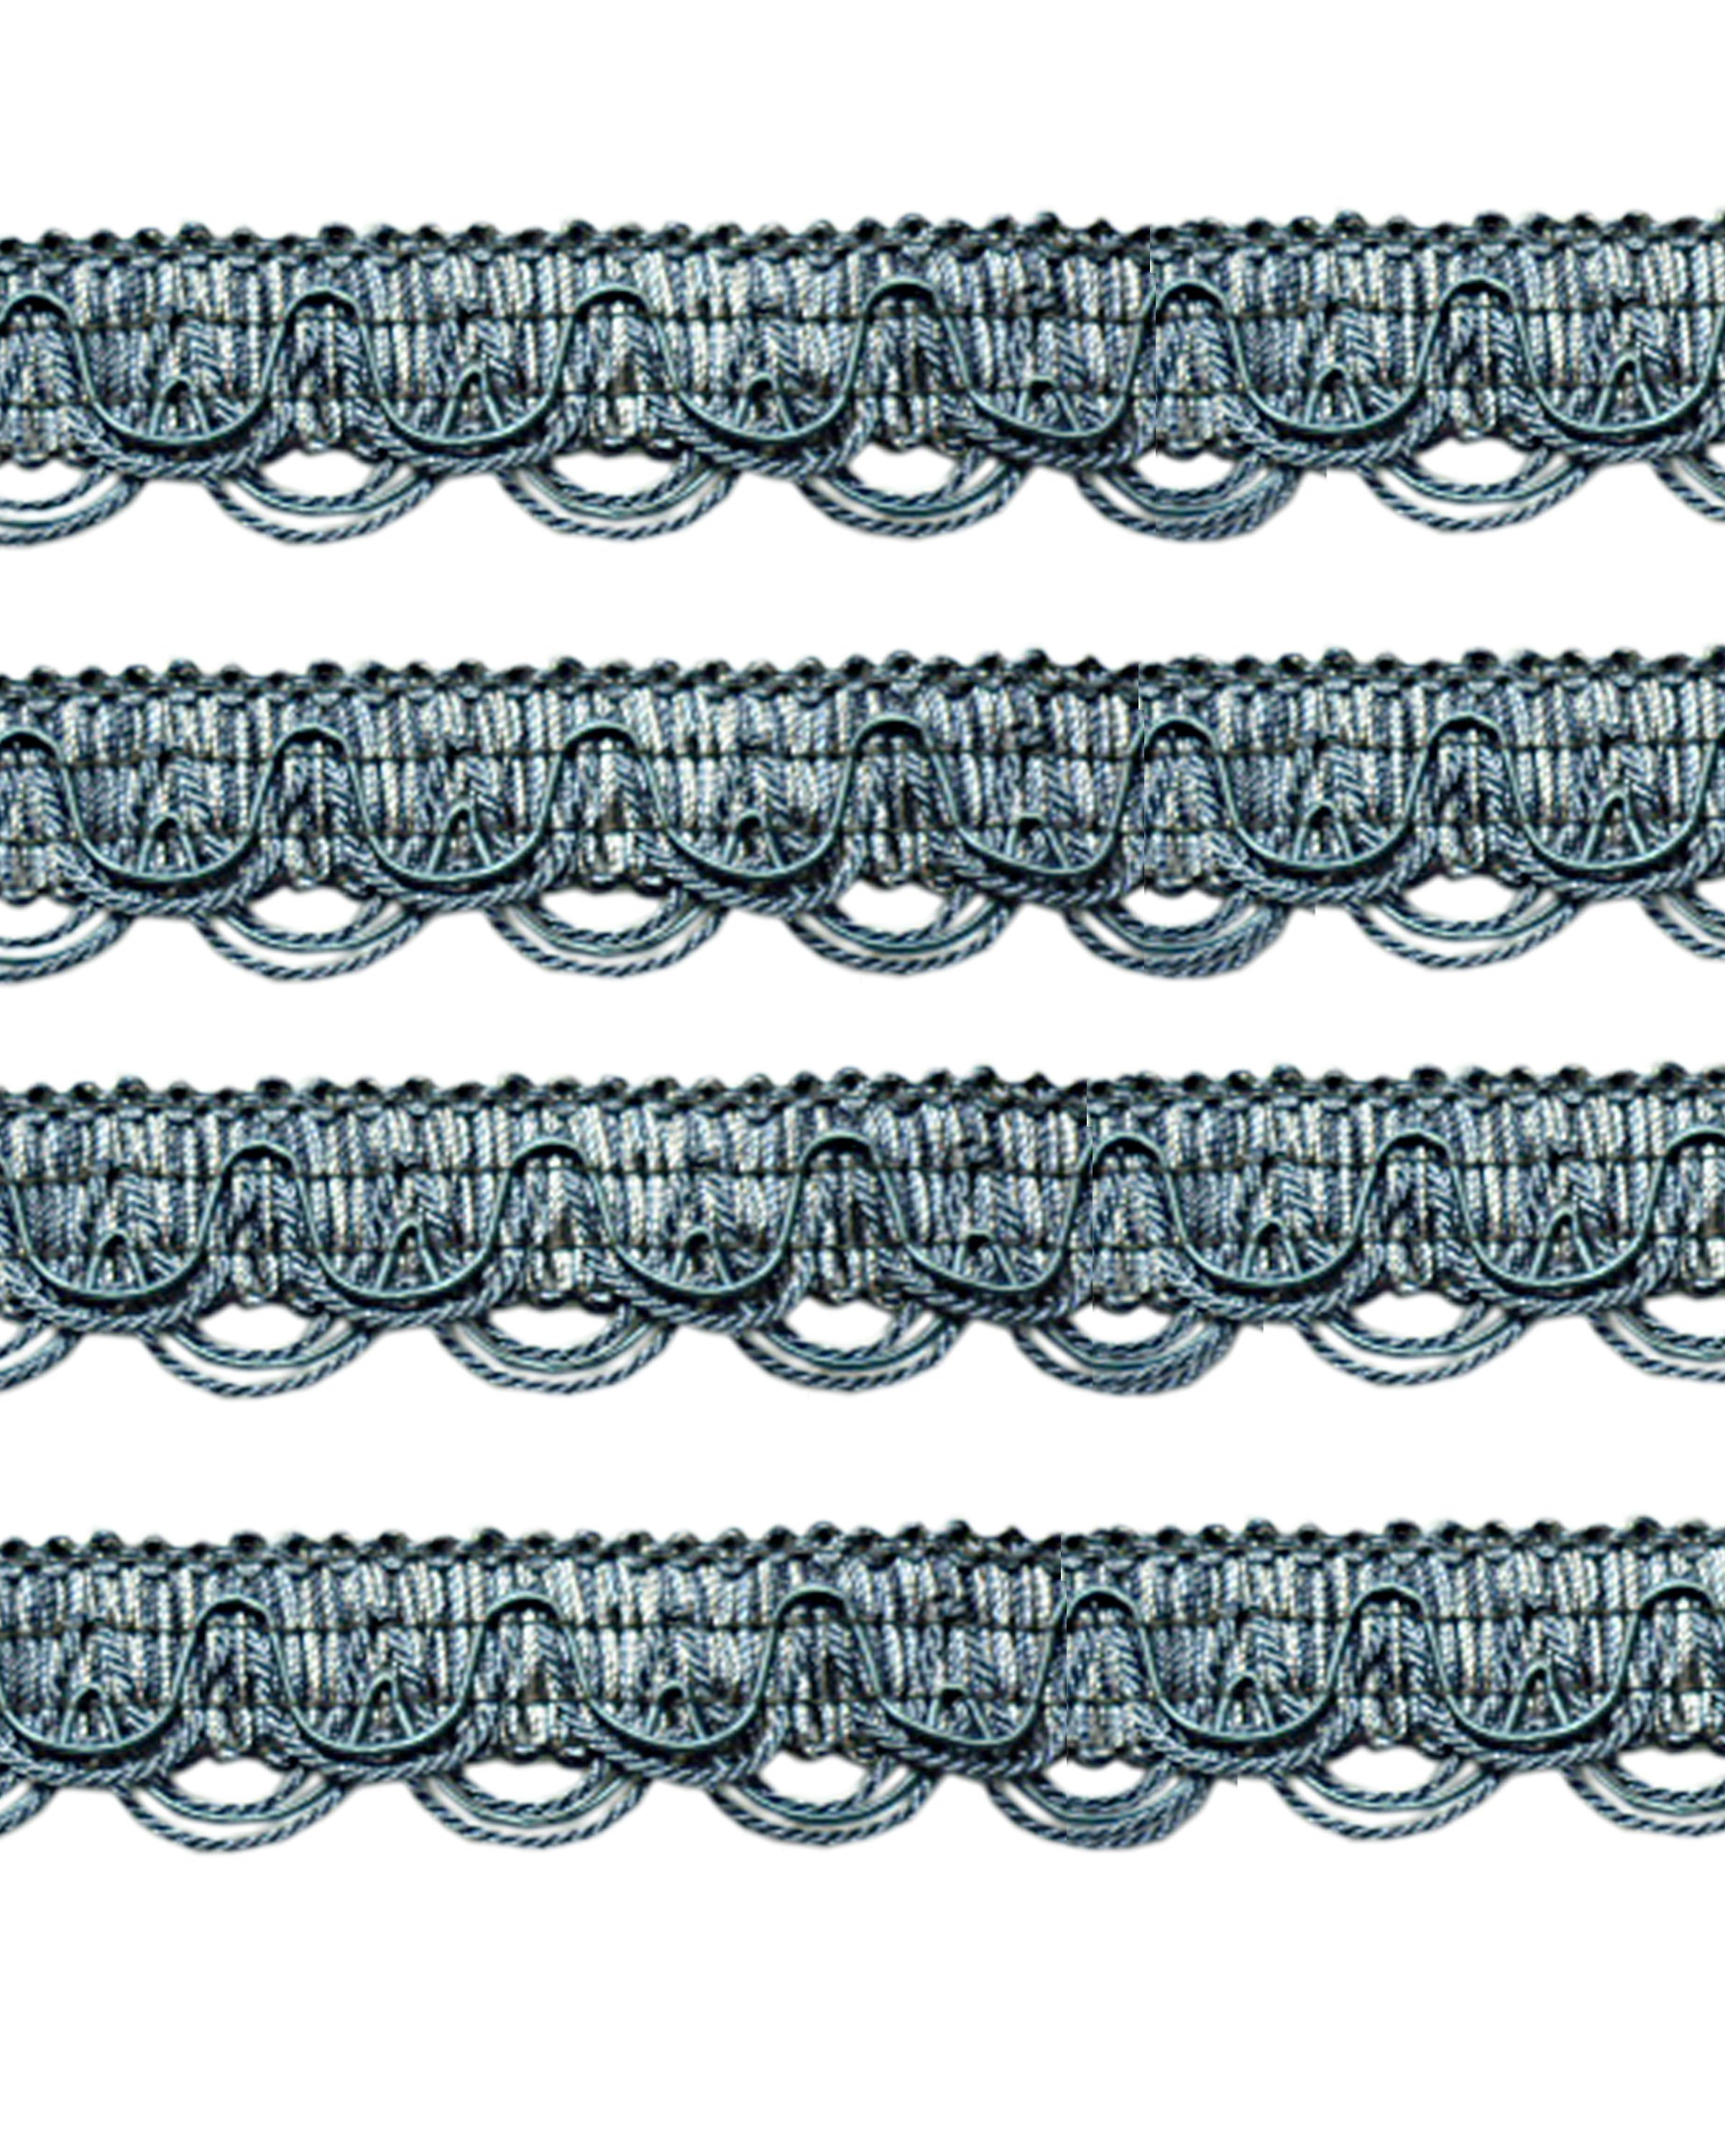 Scalloped Looped Braid - Blue 28mm Price is for 5 metres